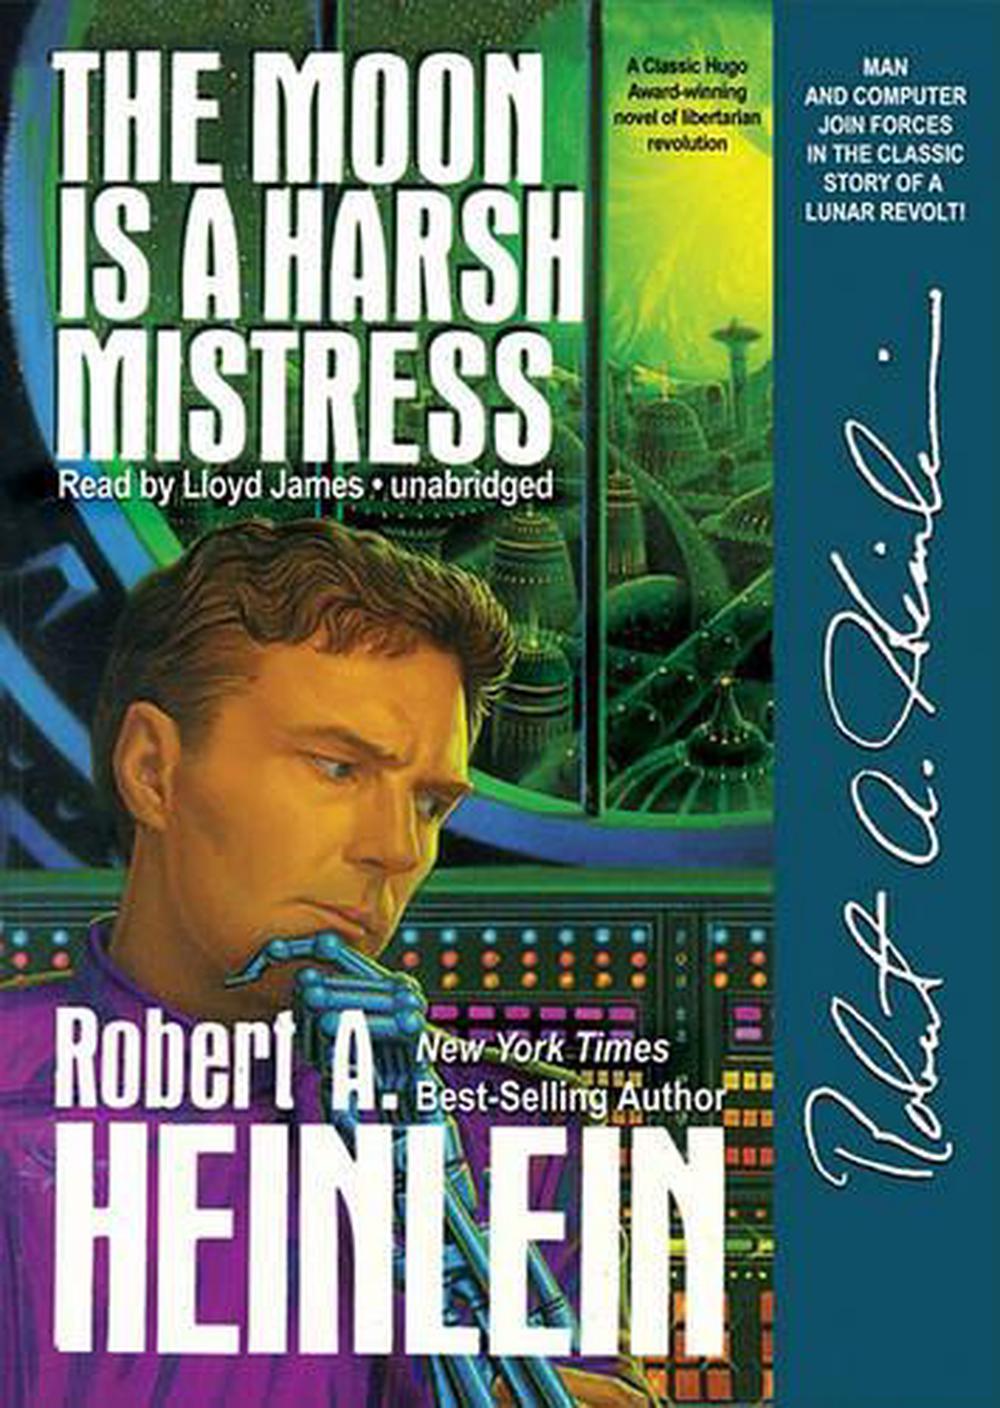 the moon is a harsh mistress audio book